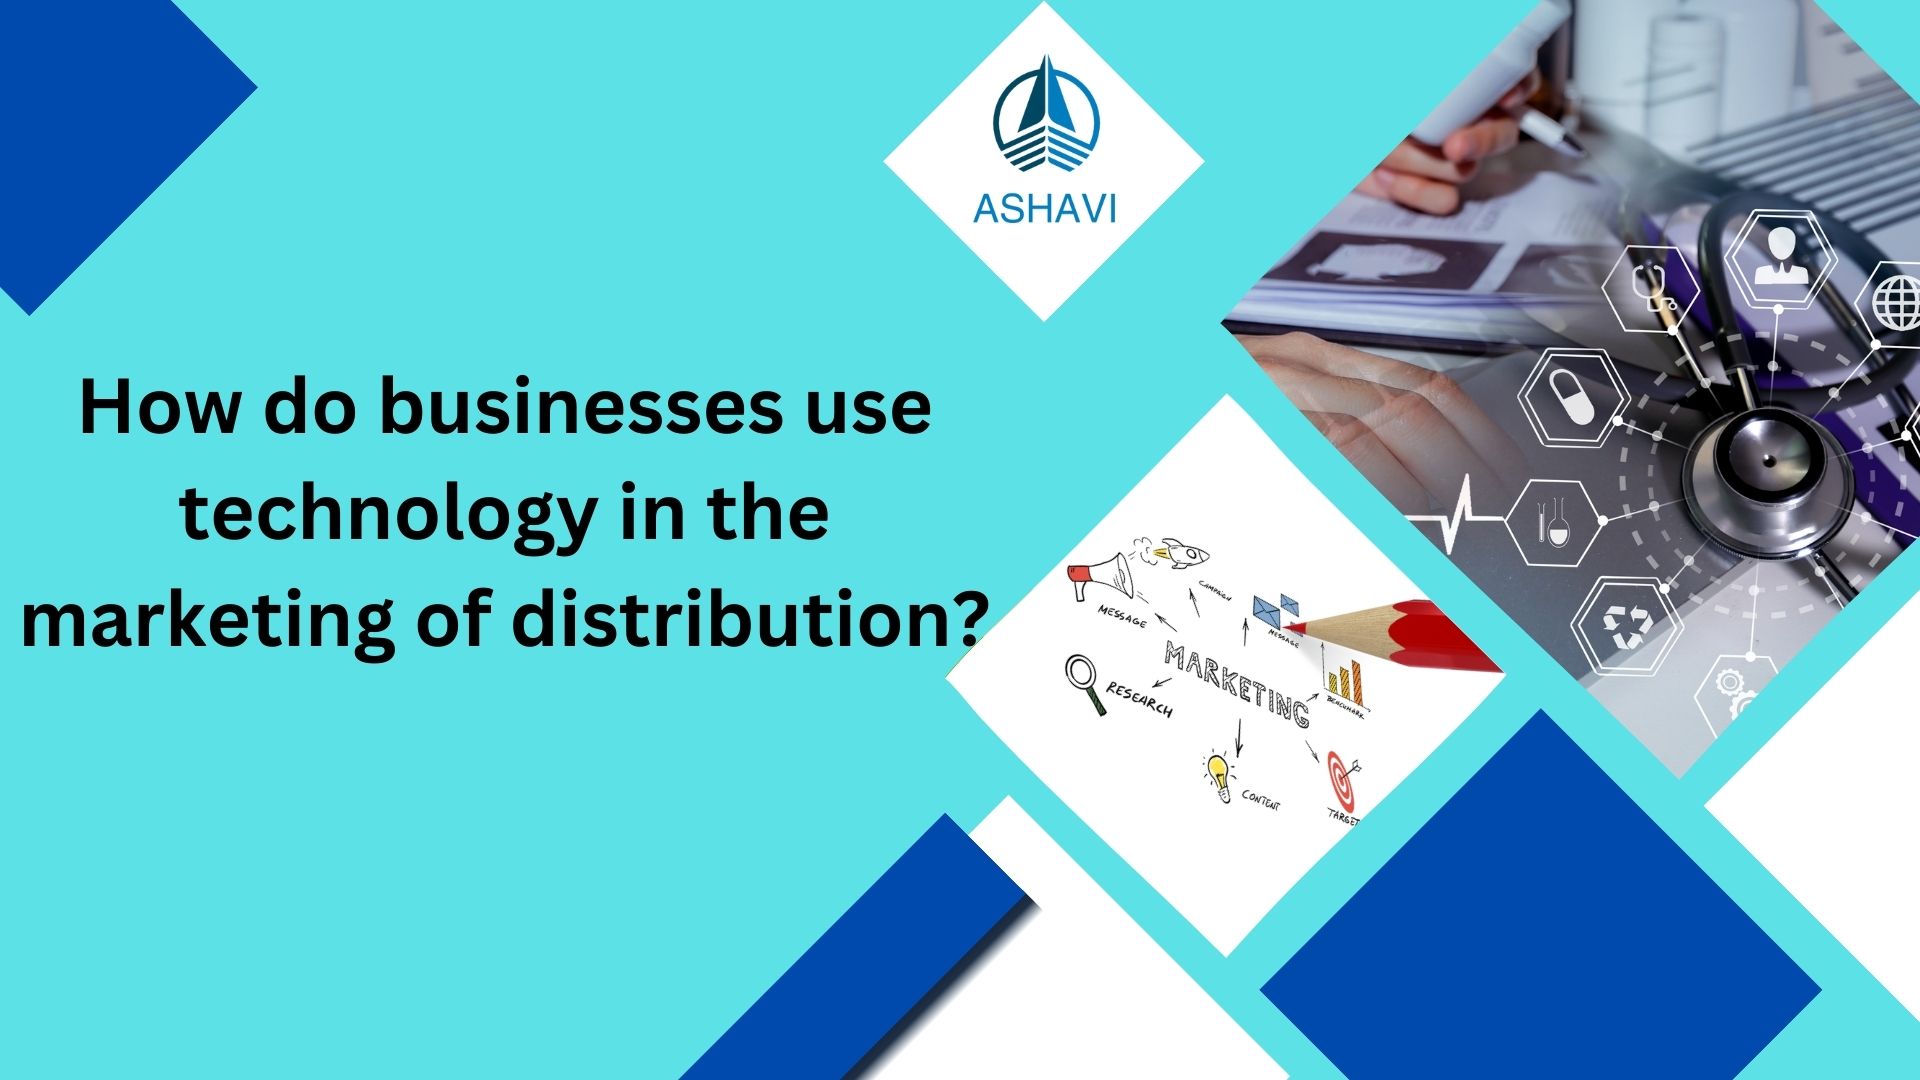 How do businesses use technology in the marketing of distribution?